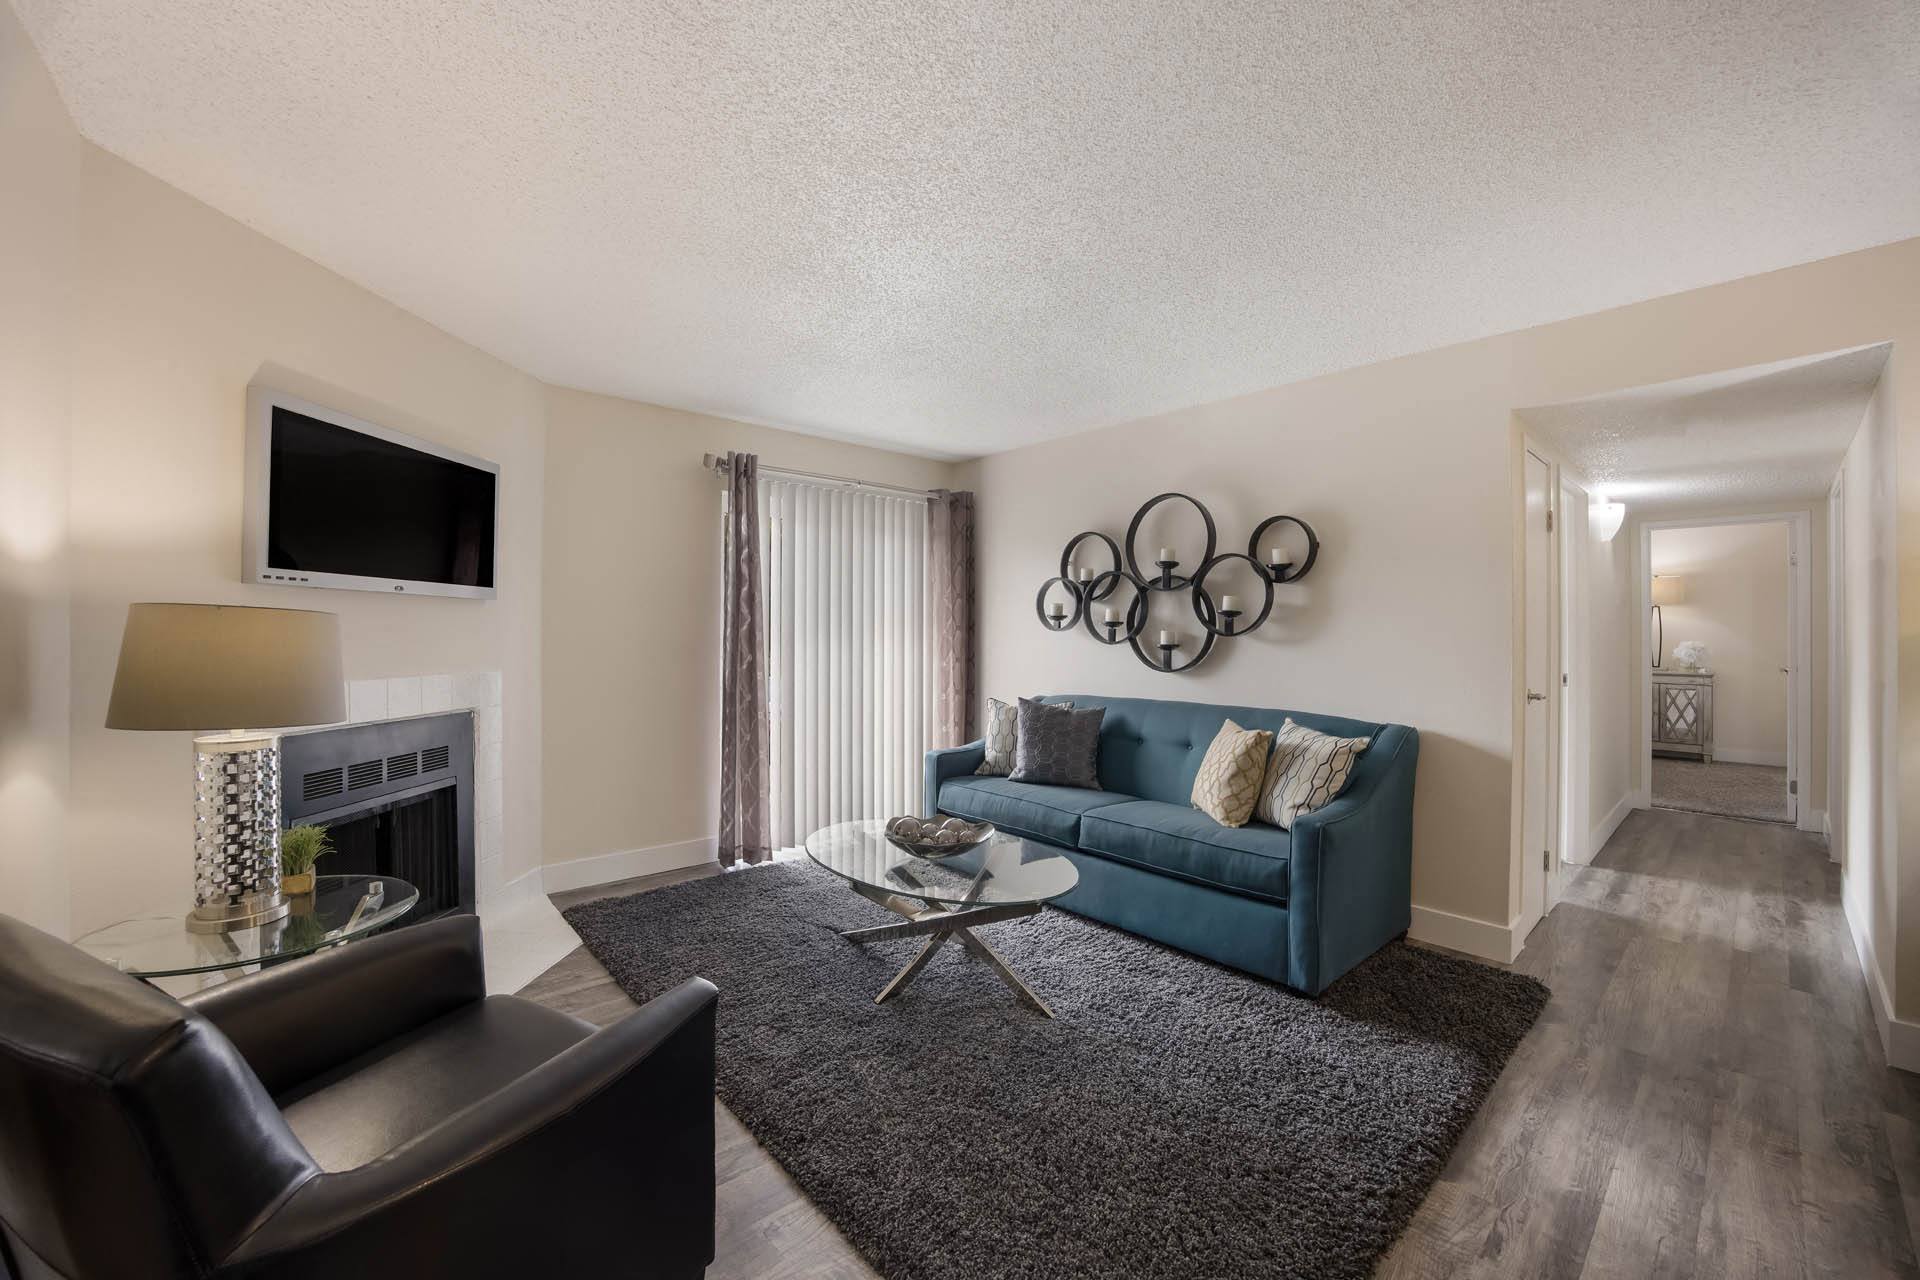 Studio Apartments For Rent in Lone Tree, CO - 21 Rentals